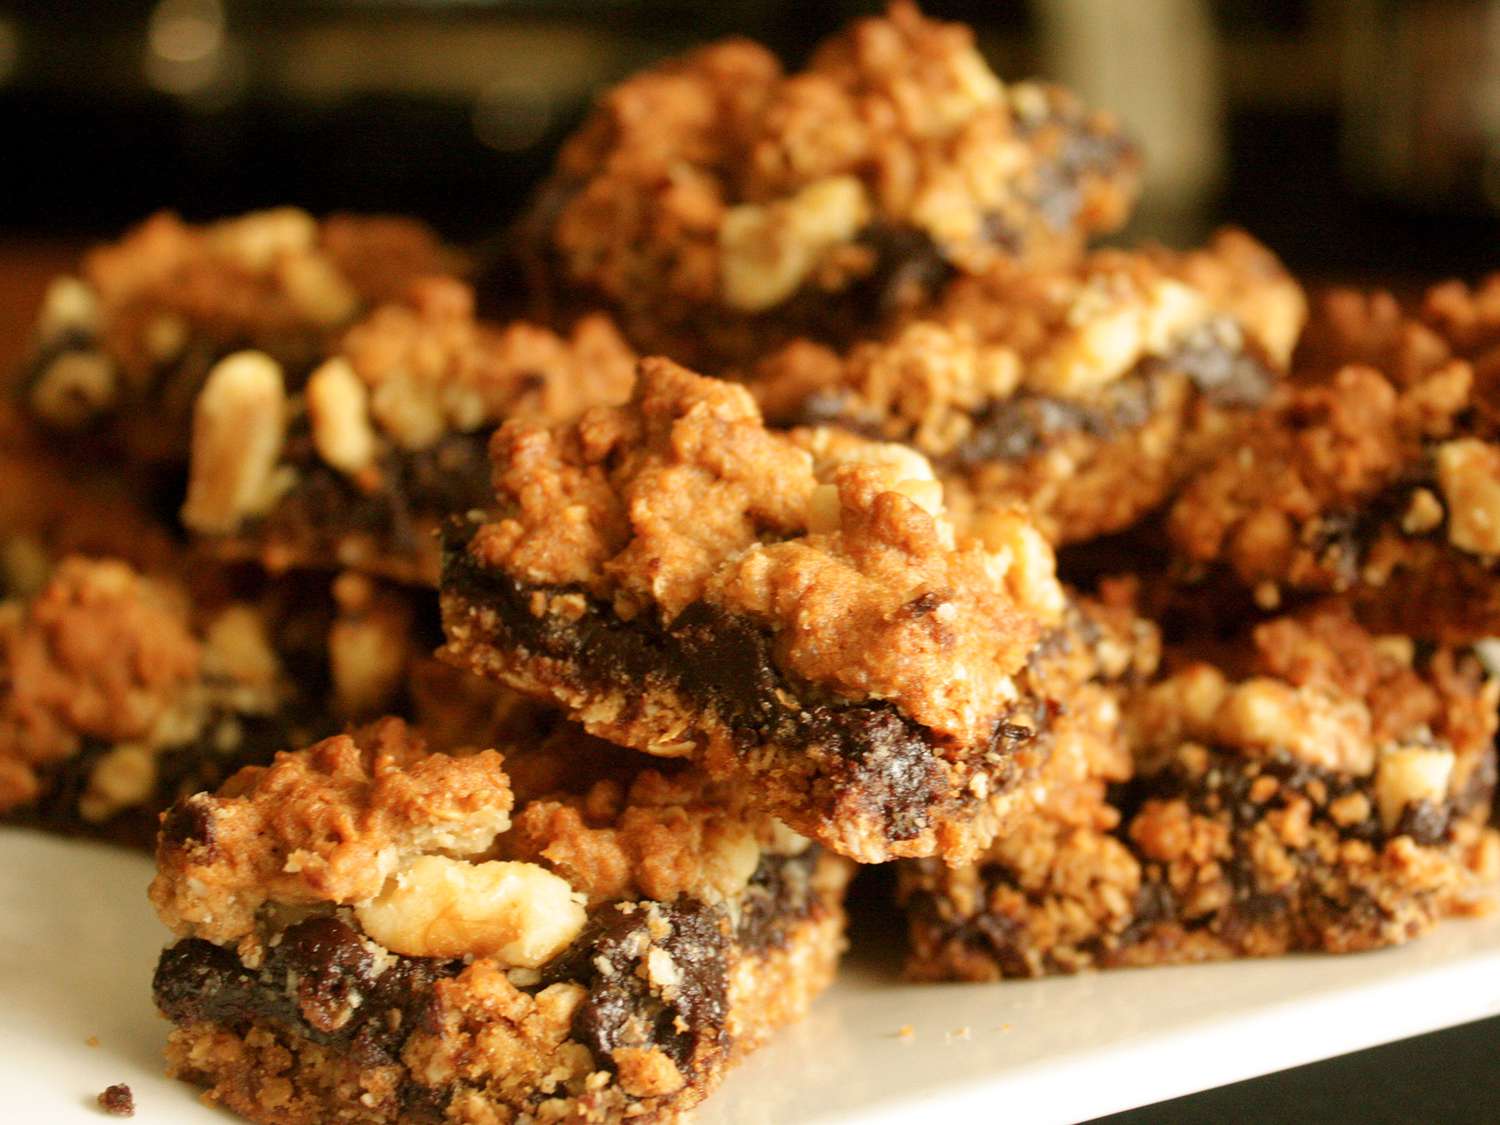 close up view of a pile of Chocolate Revel Bars on a platter